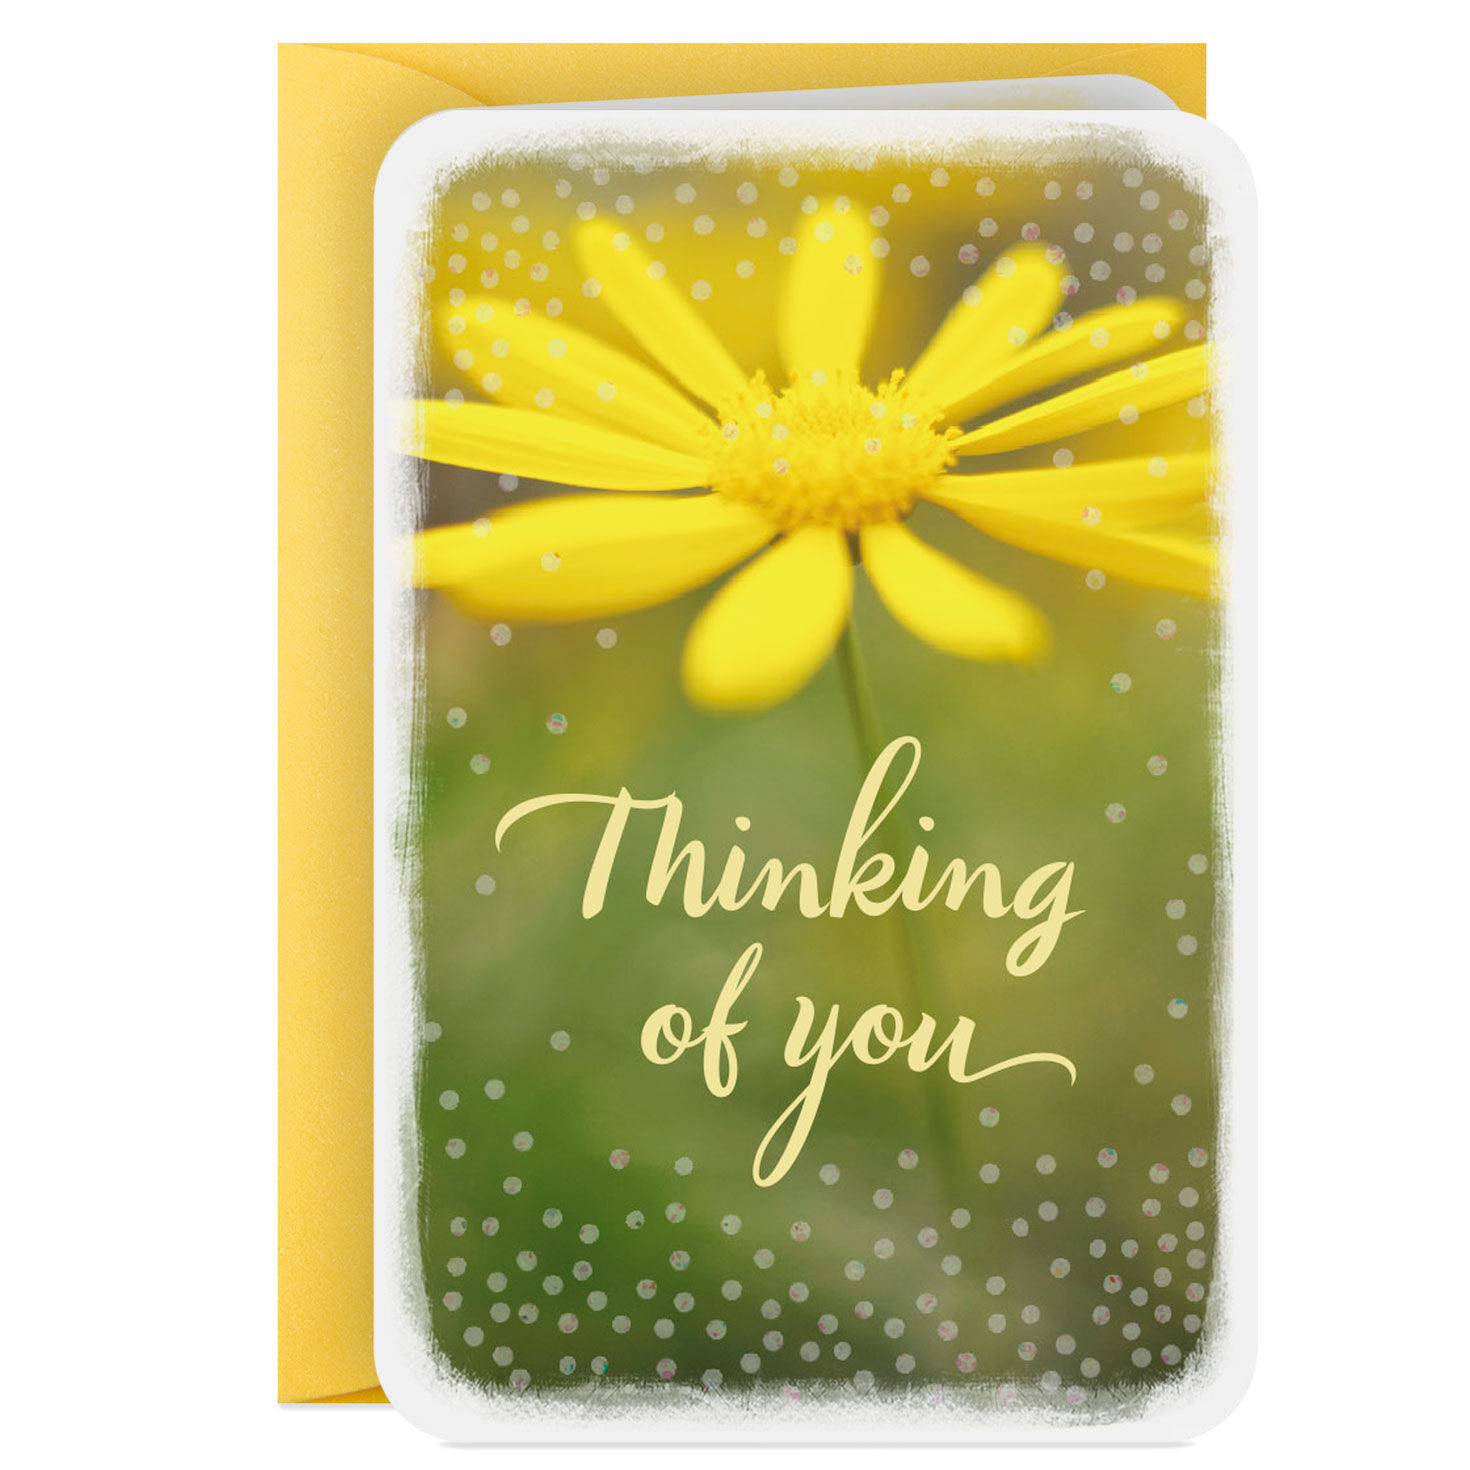 3.25" Mini Hope You're Having a Good Day Thinking of You Card for only USD 1.99 | Hallmark